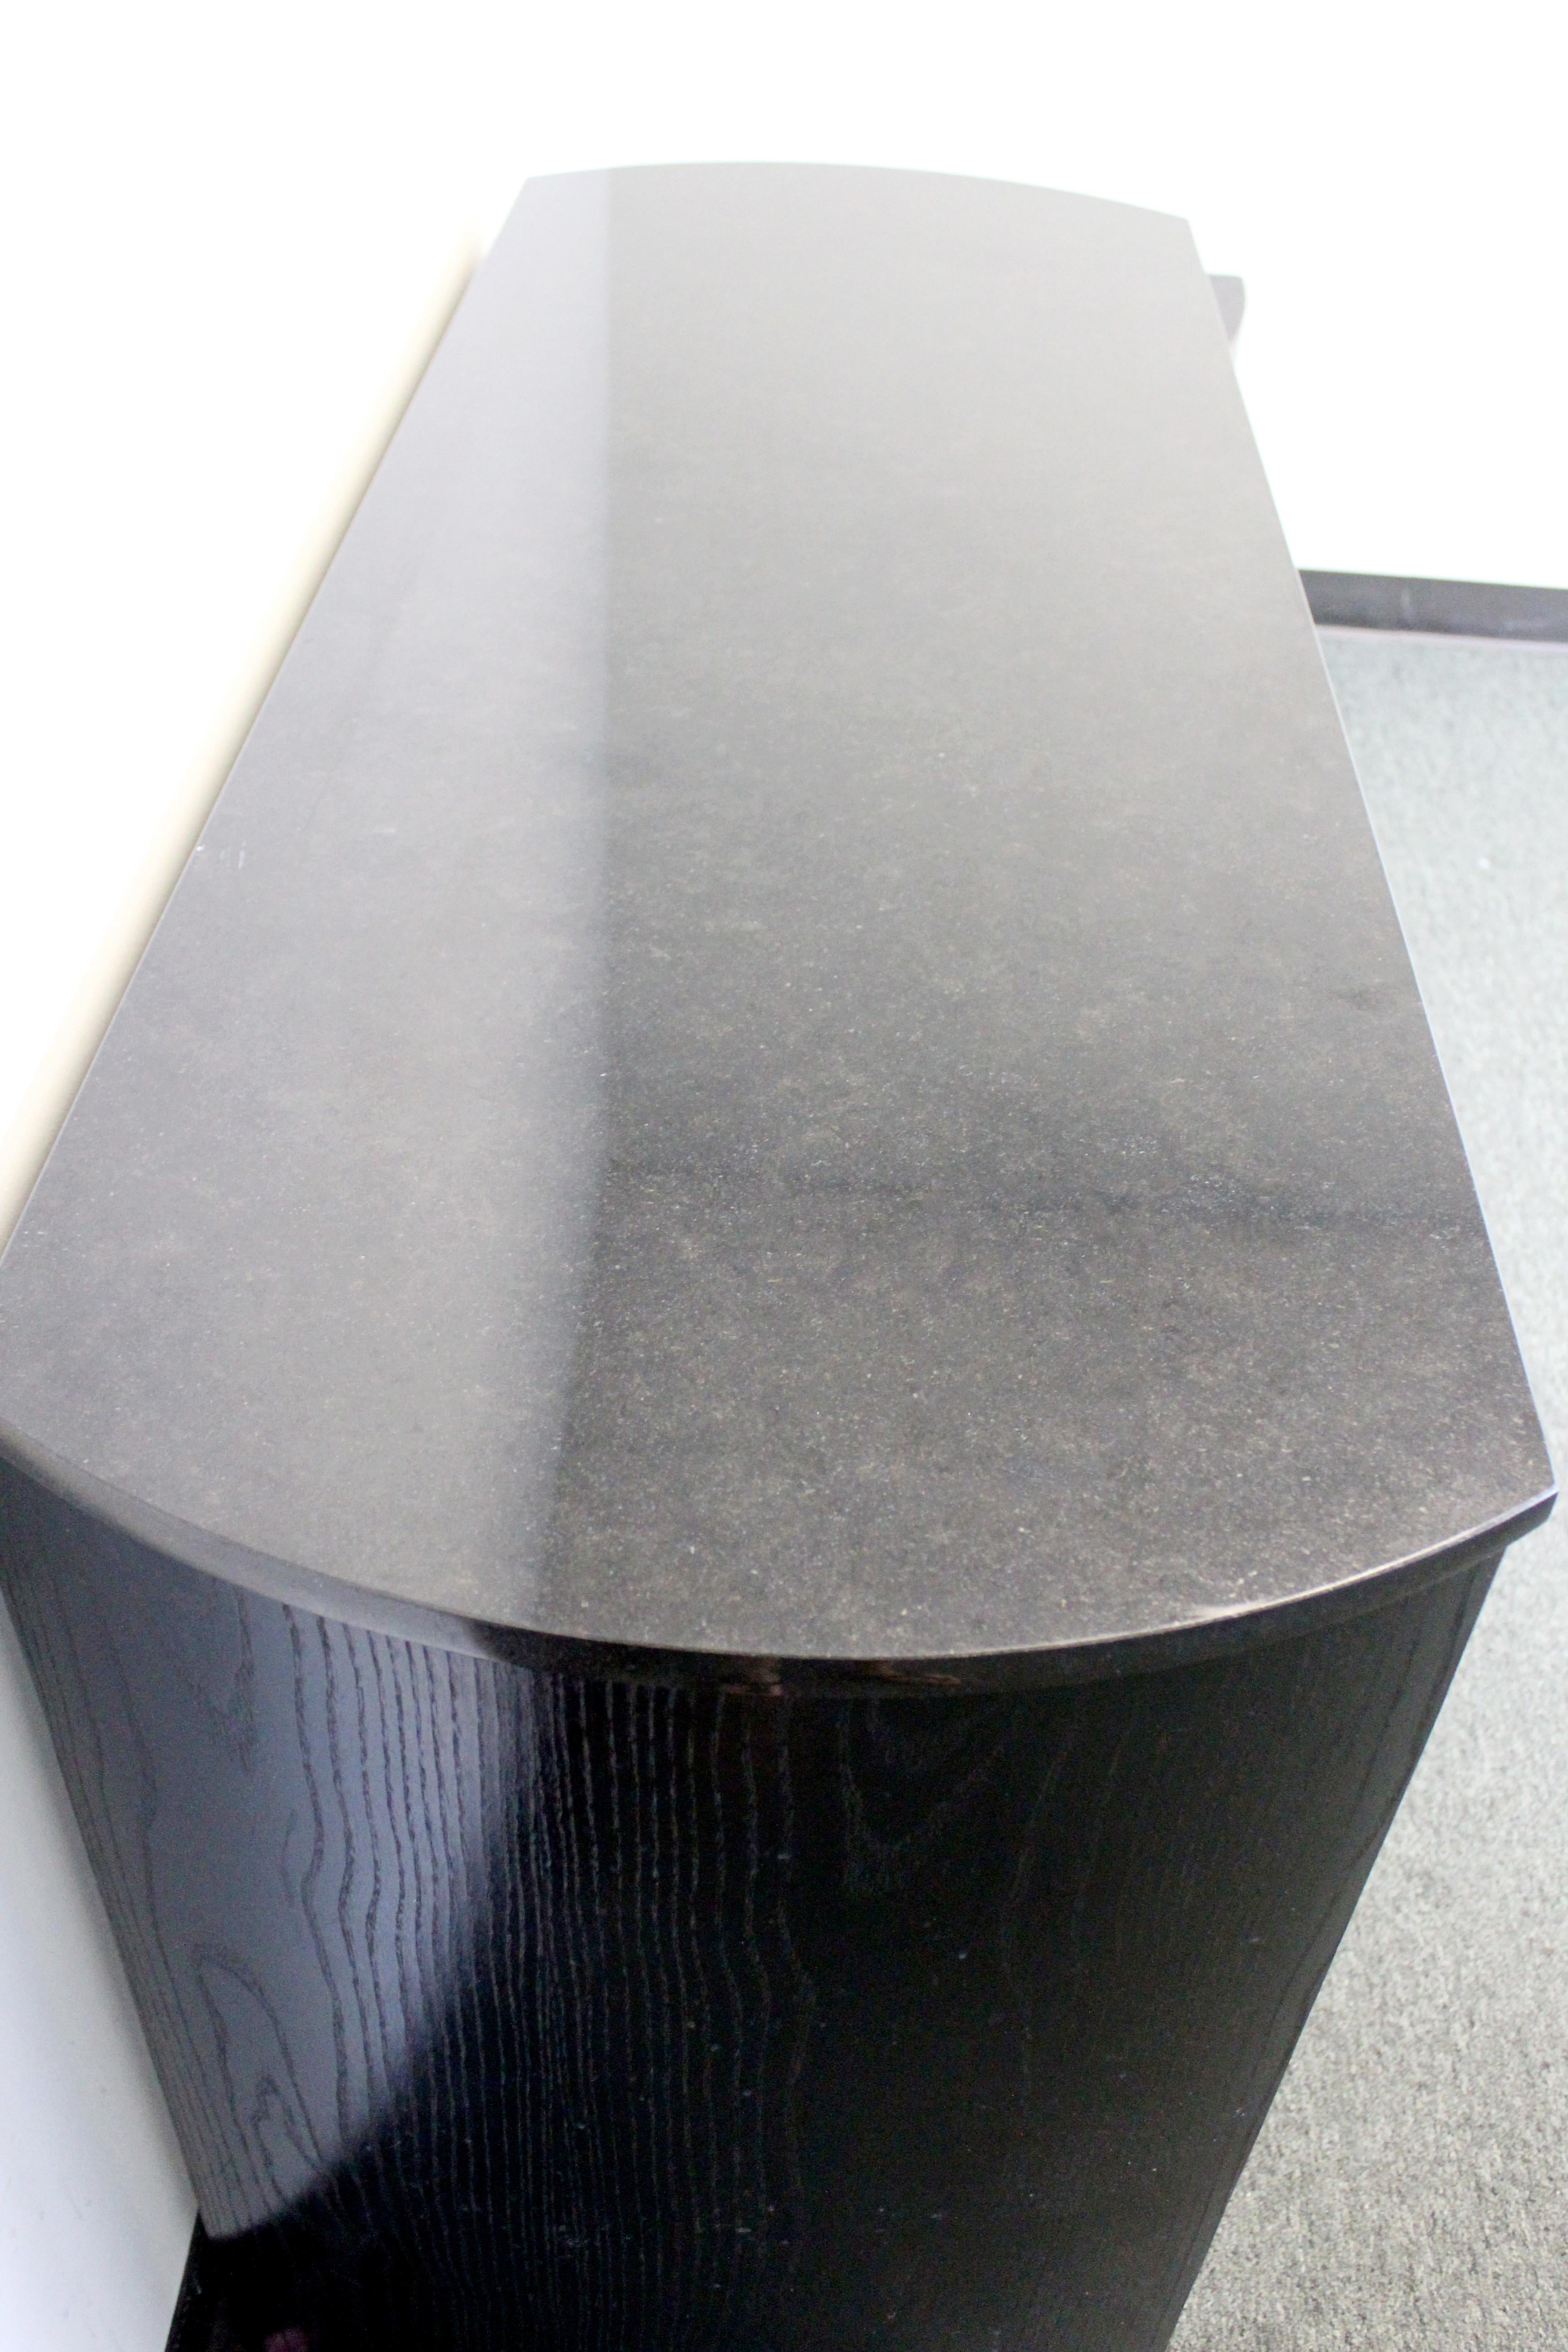 Late 20th Century Contemporary Modern Black Wood Granite Topped Console Table with 2 Drawers 1980s